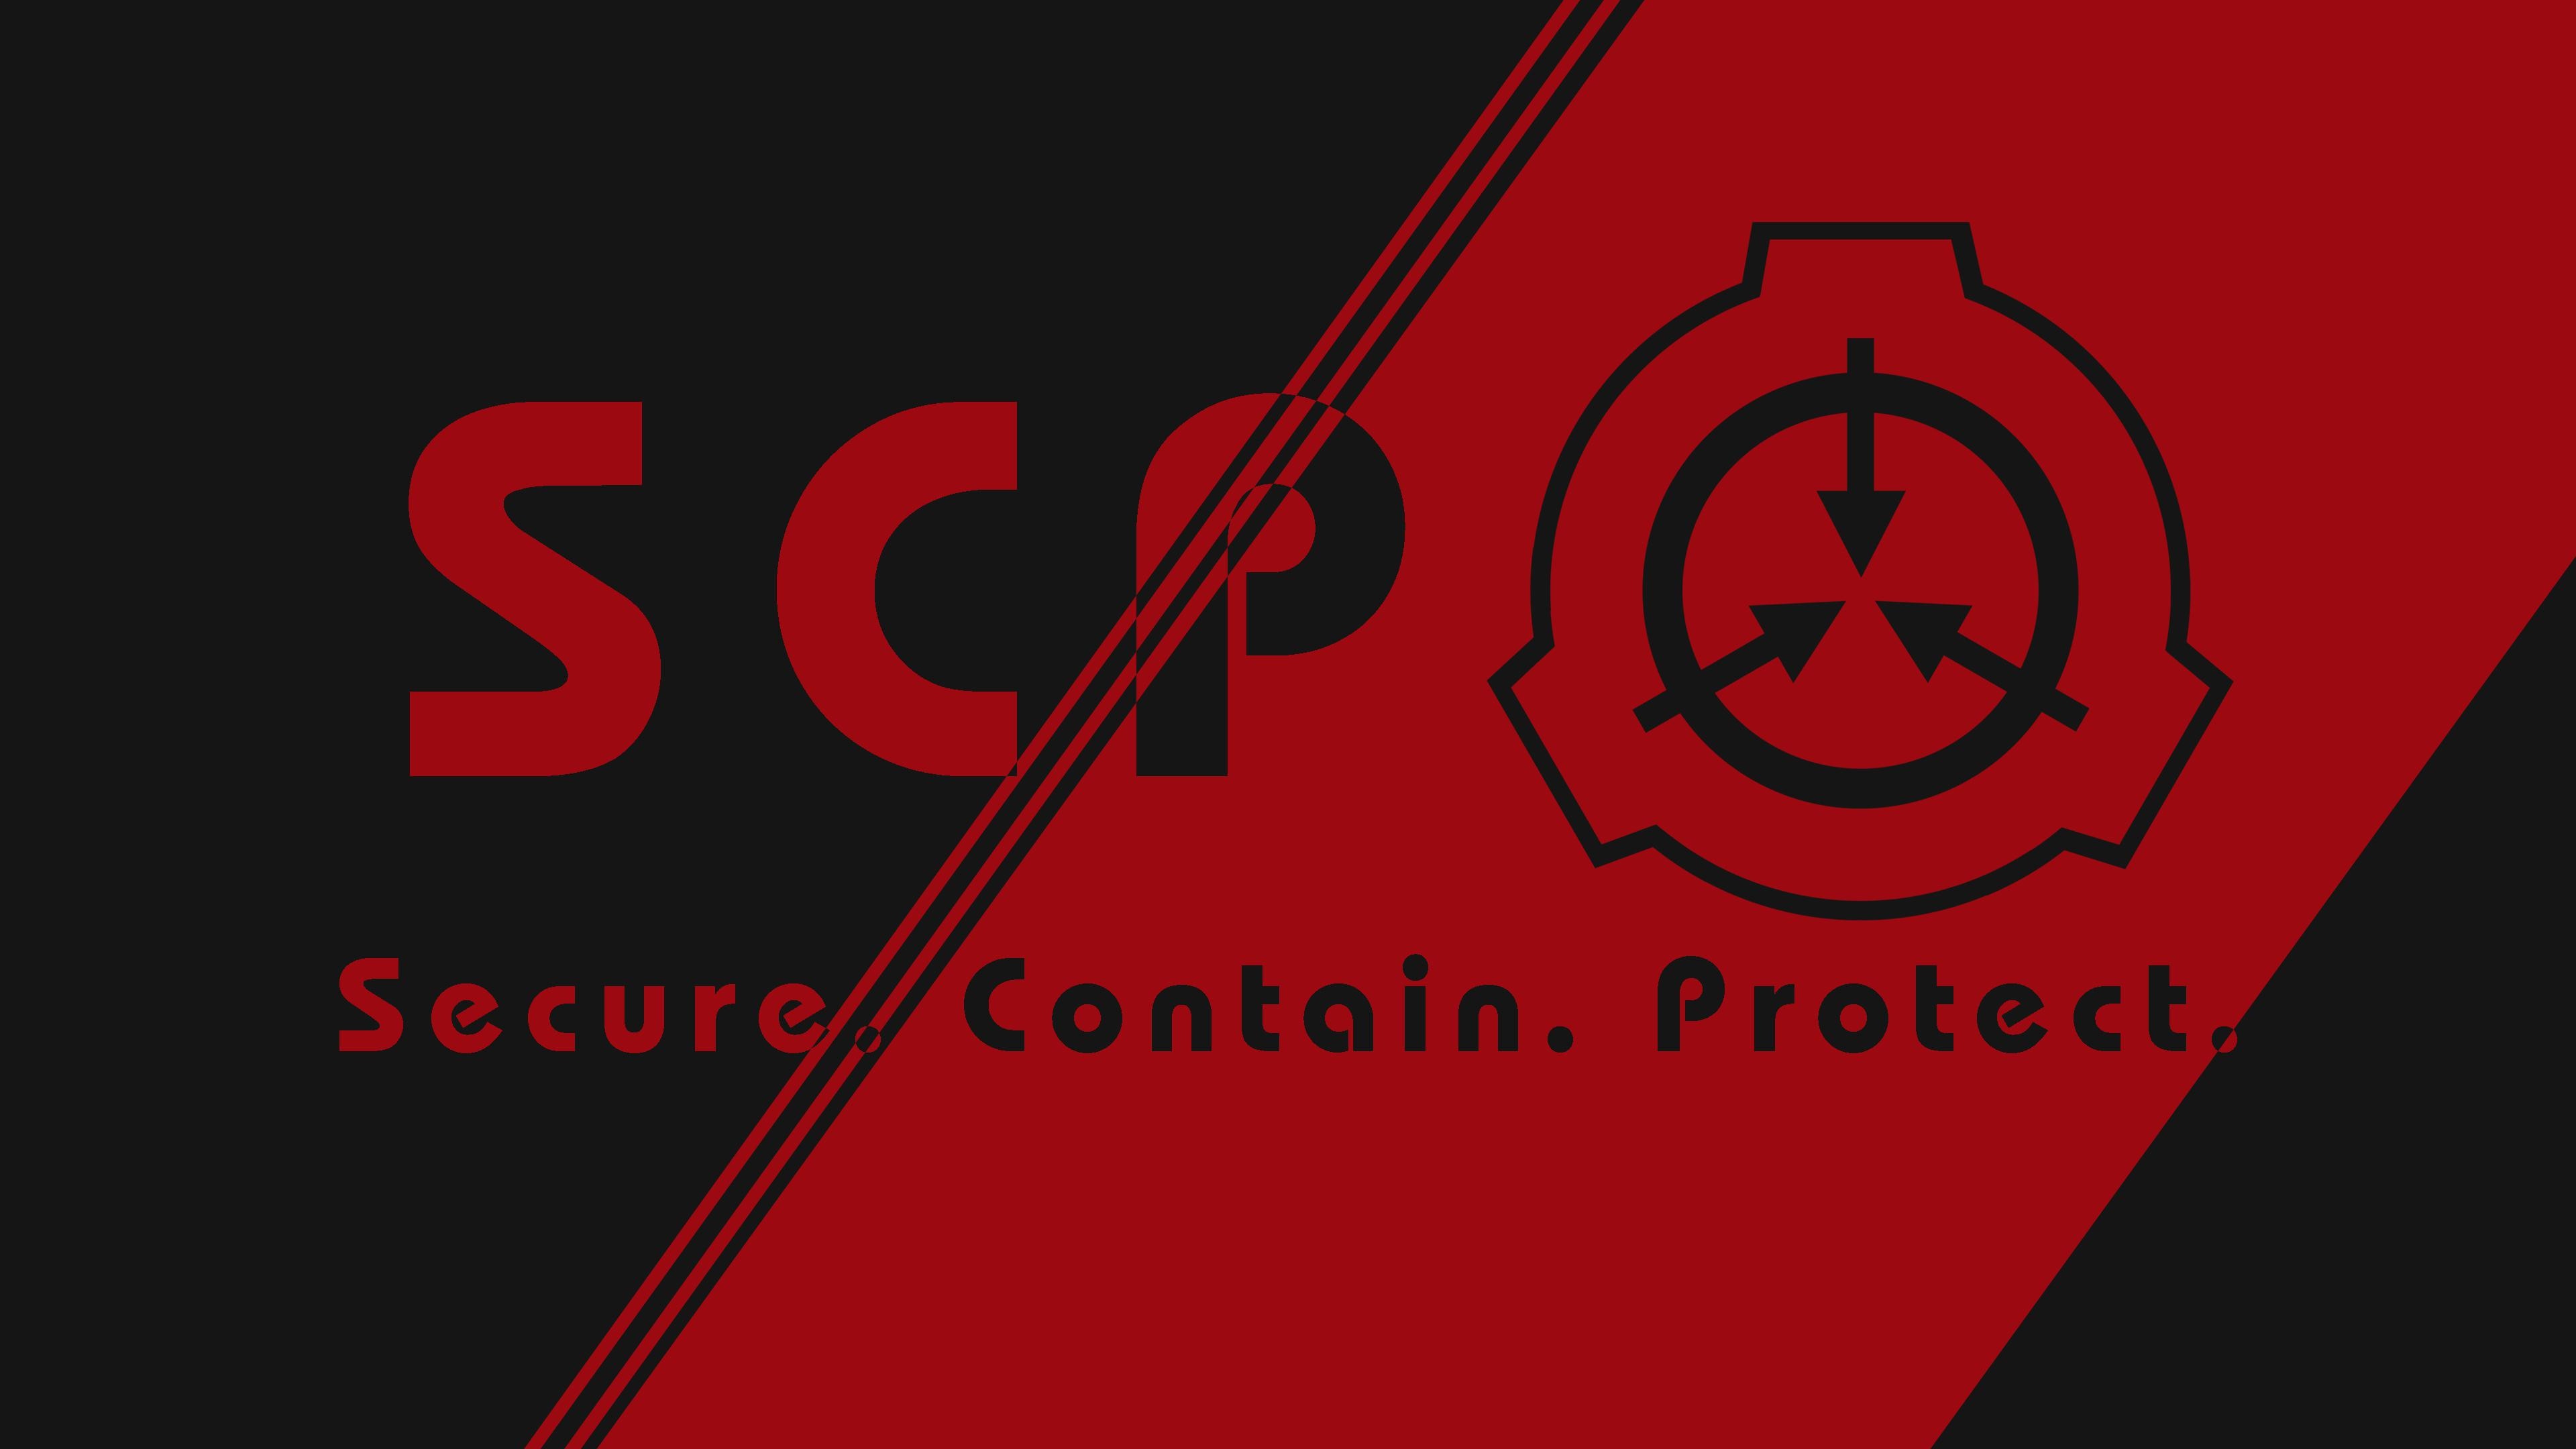 096 image - Site 50 (CANCELLED) mod for SCP - Containment Breach